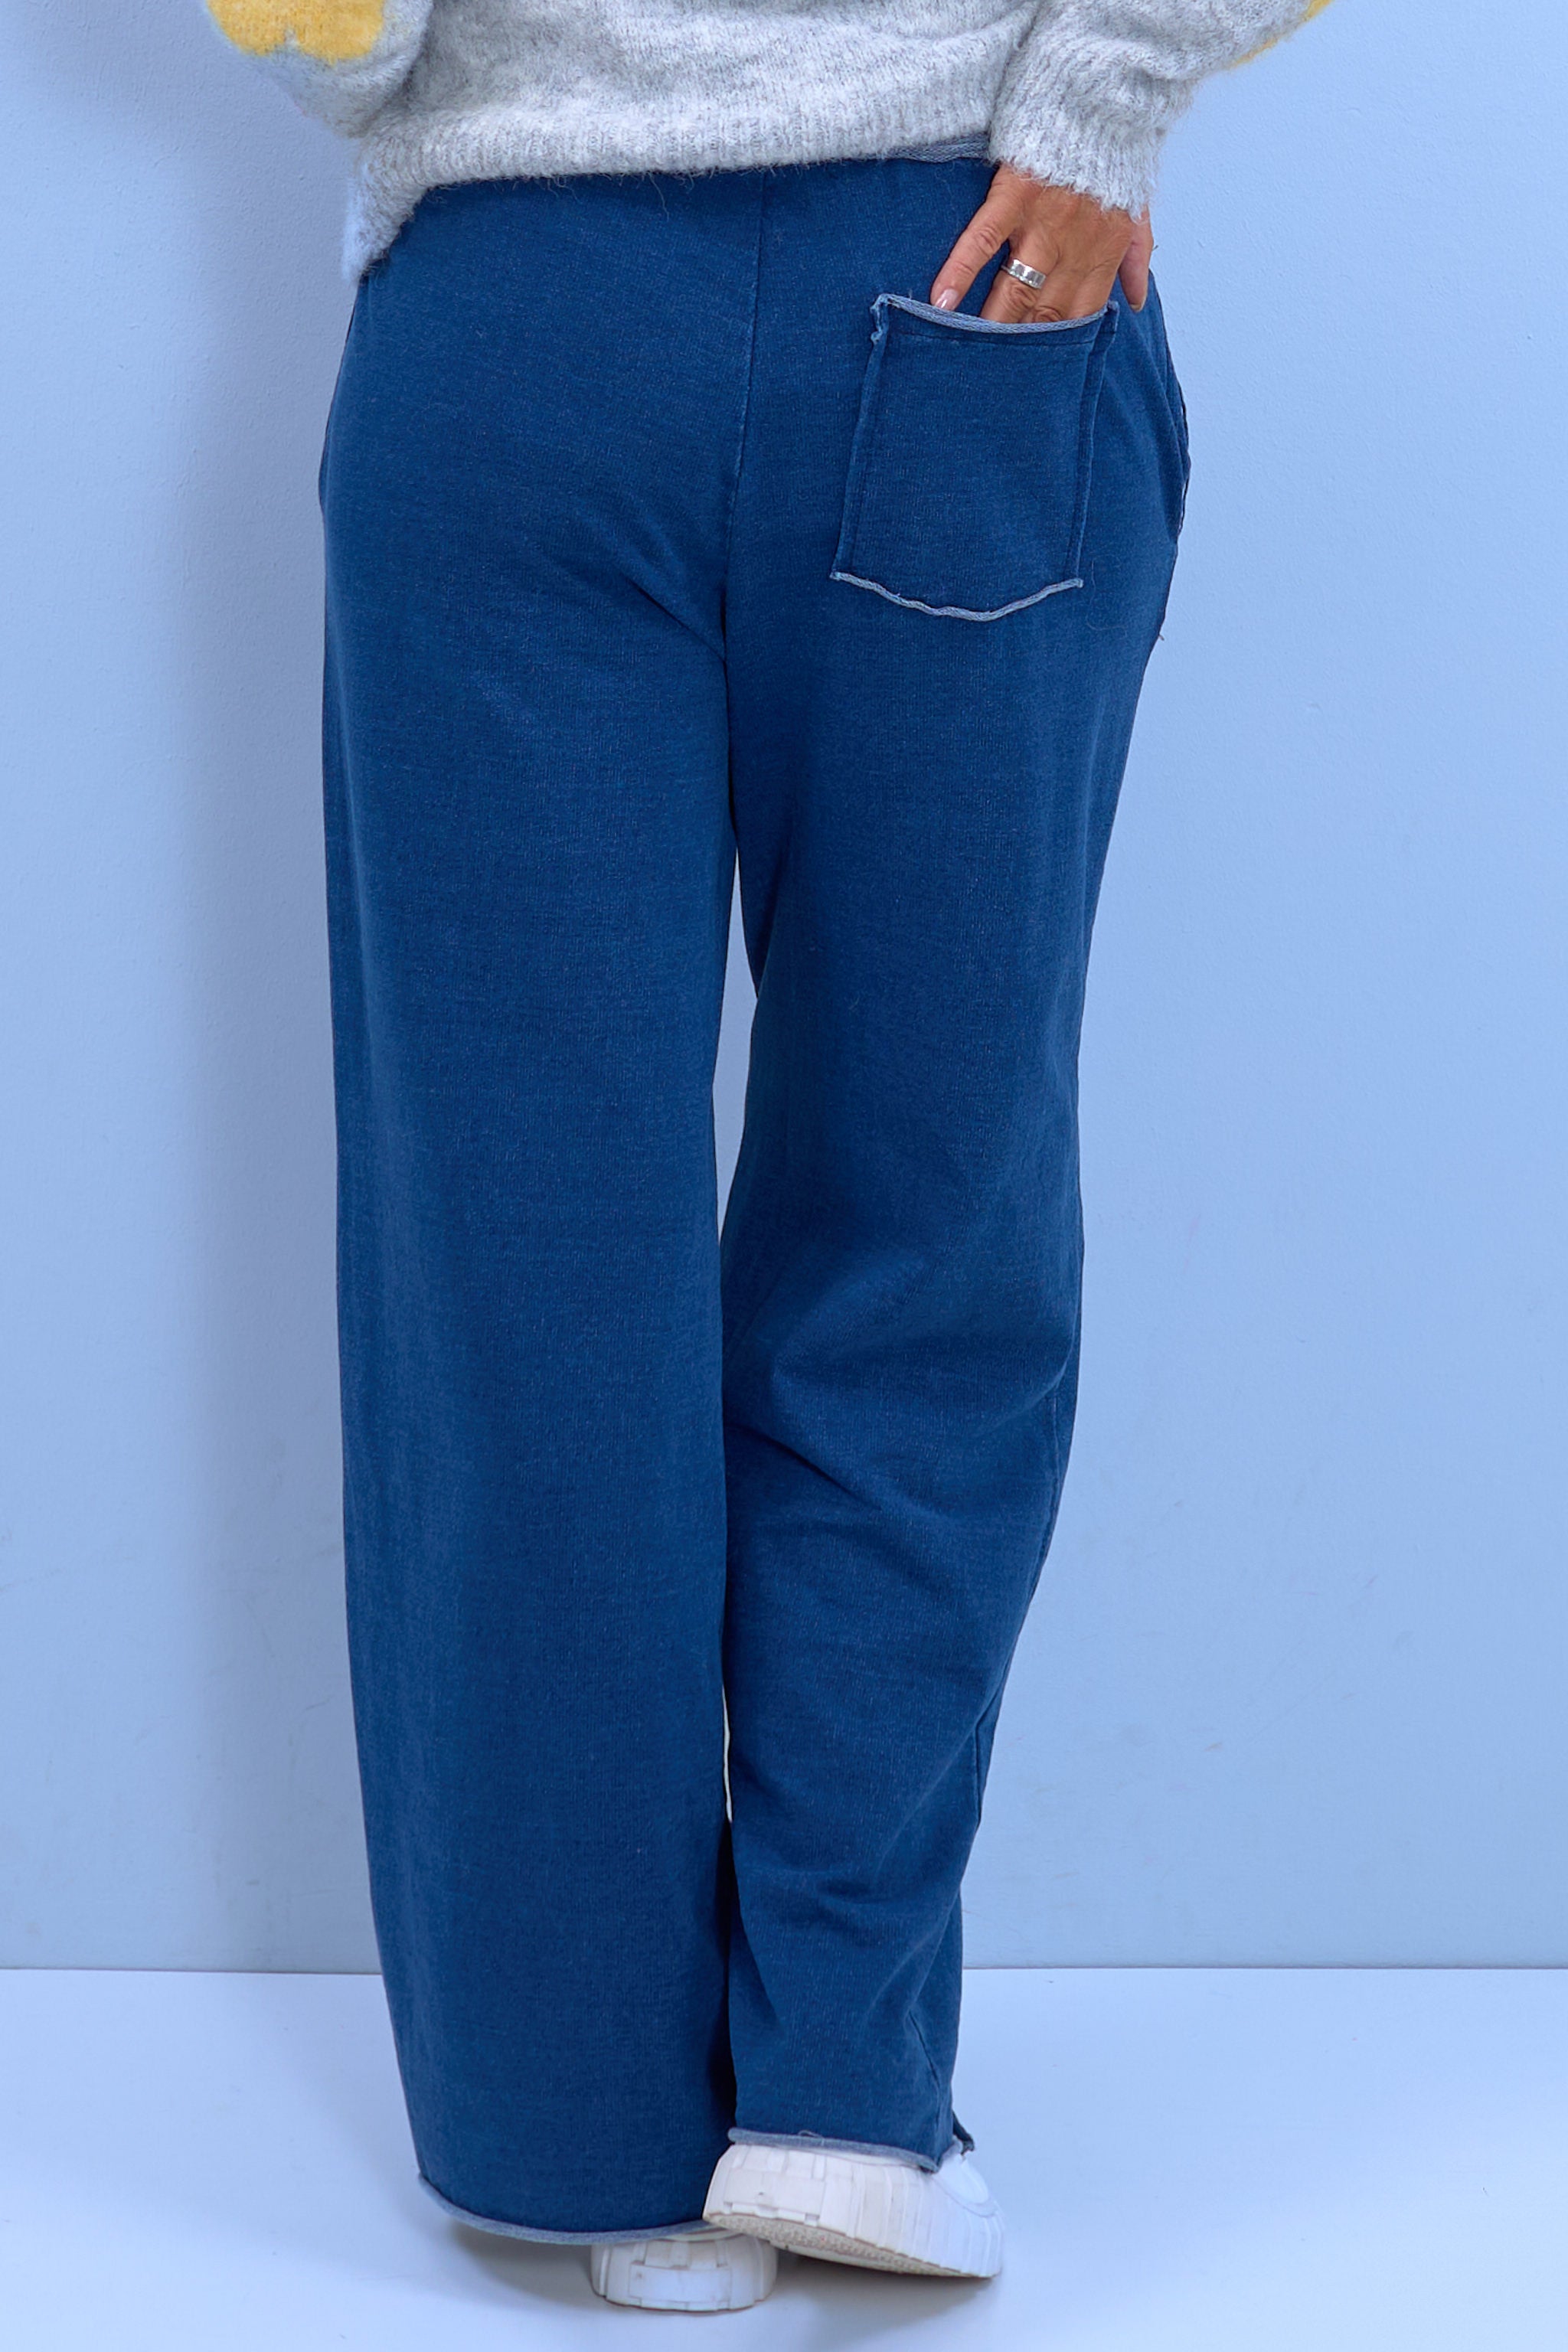 Marlene style sweatpants with piping, blue